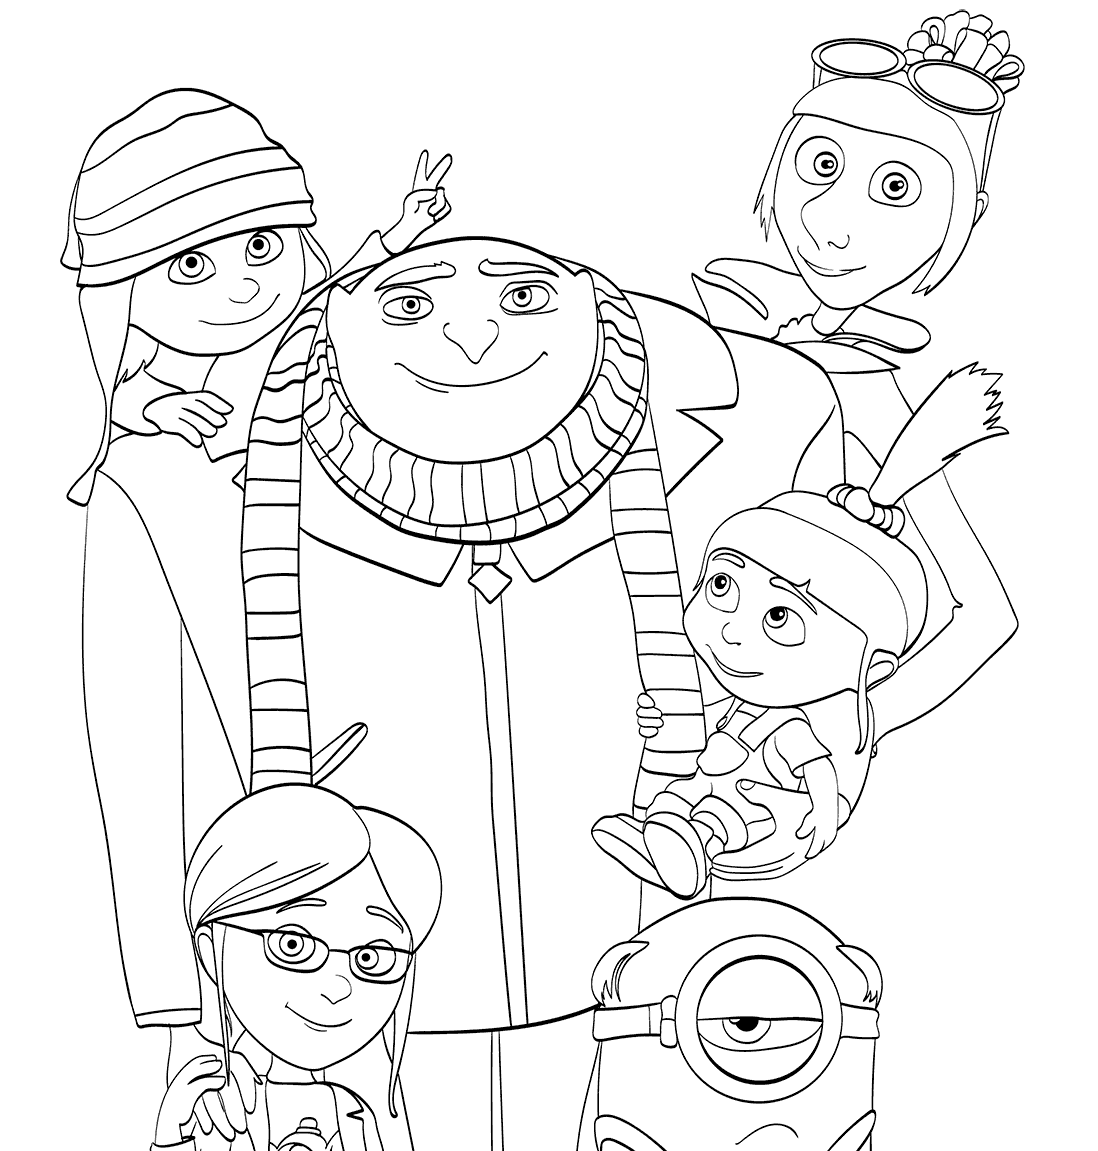 Despicable Me 3 coloring pages to download and print for free